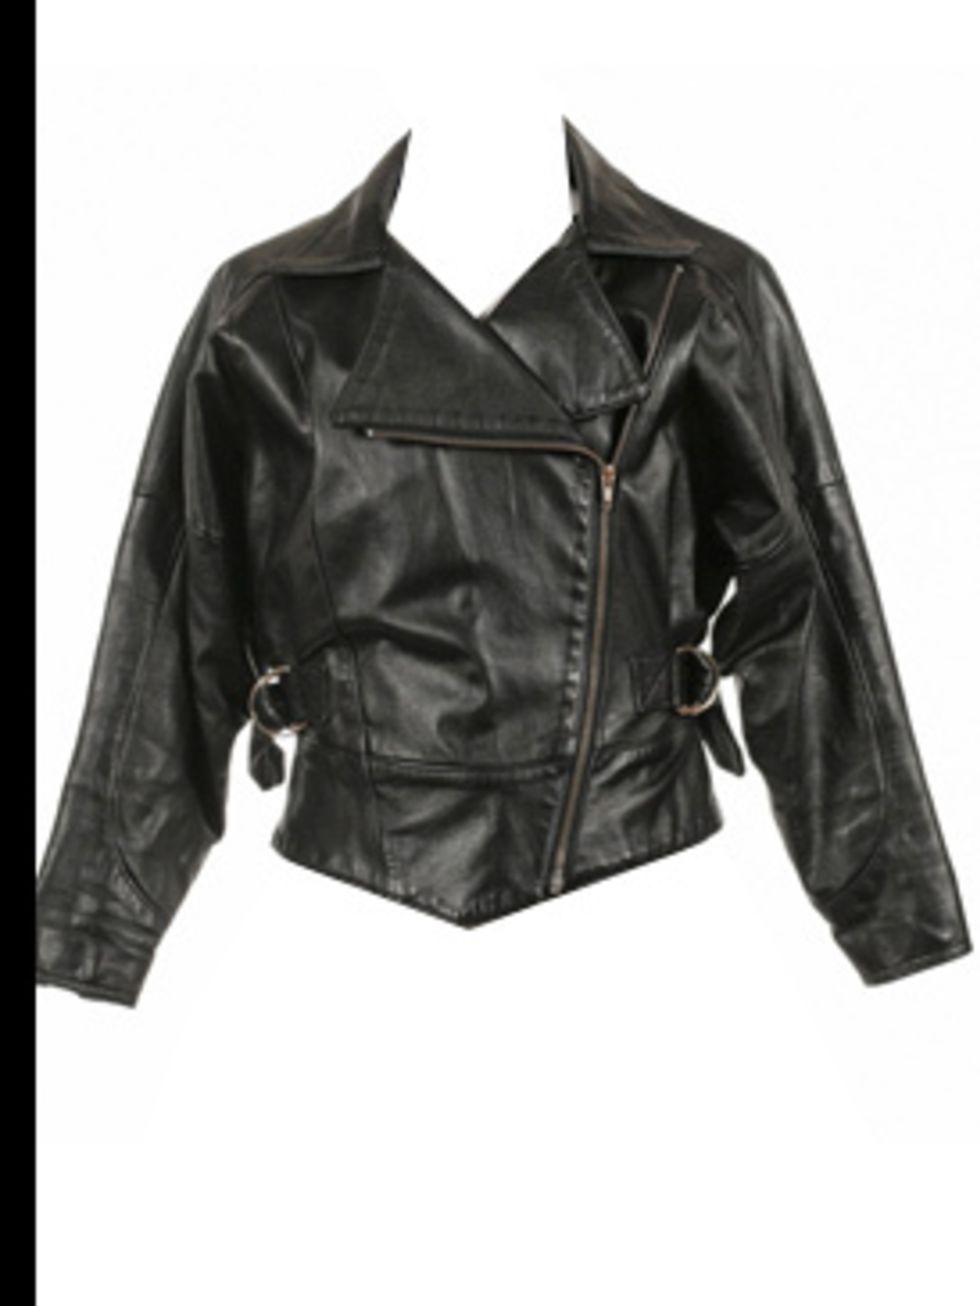 <p>Jacket, £70.00 at <a href="http://www.rokit.co.uk/product.php?product_id=WC400036">Rokit</a></p>